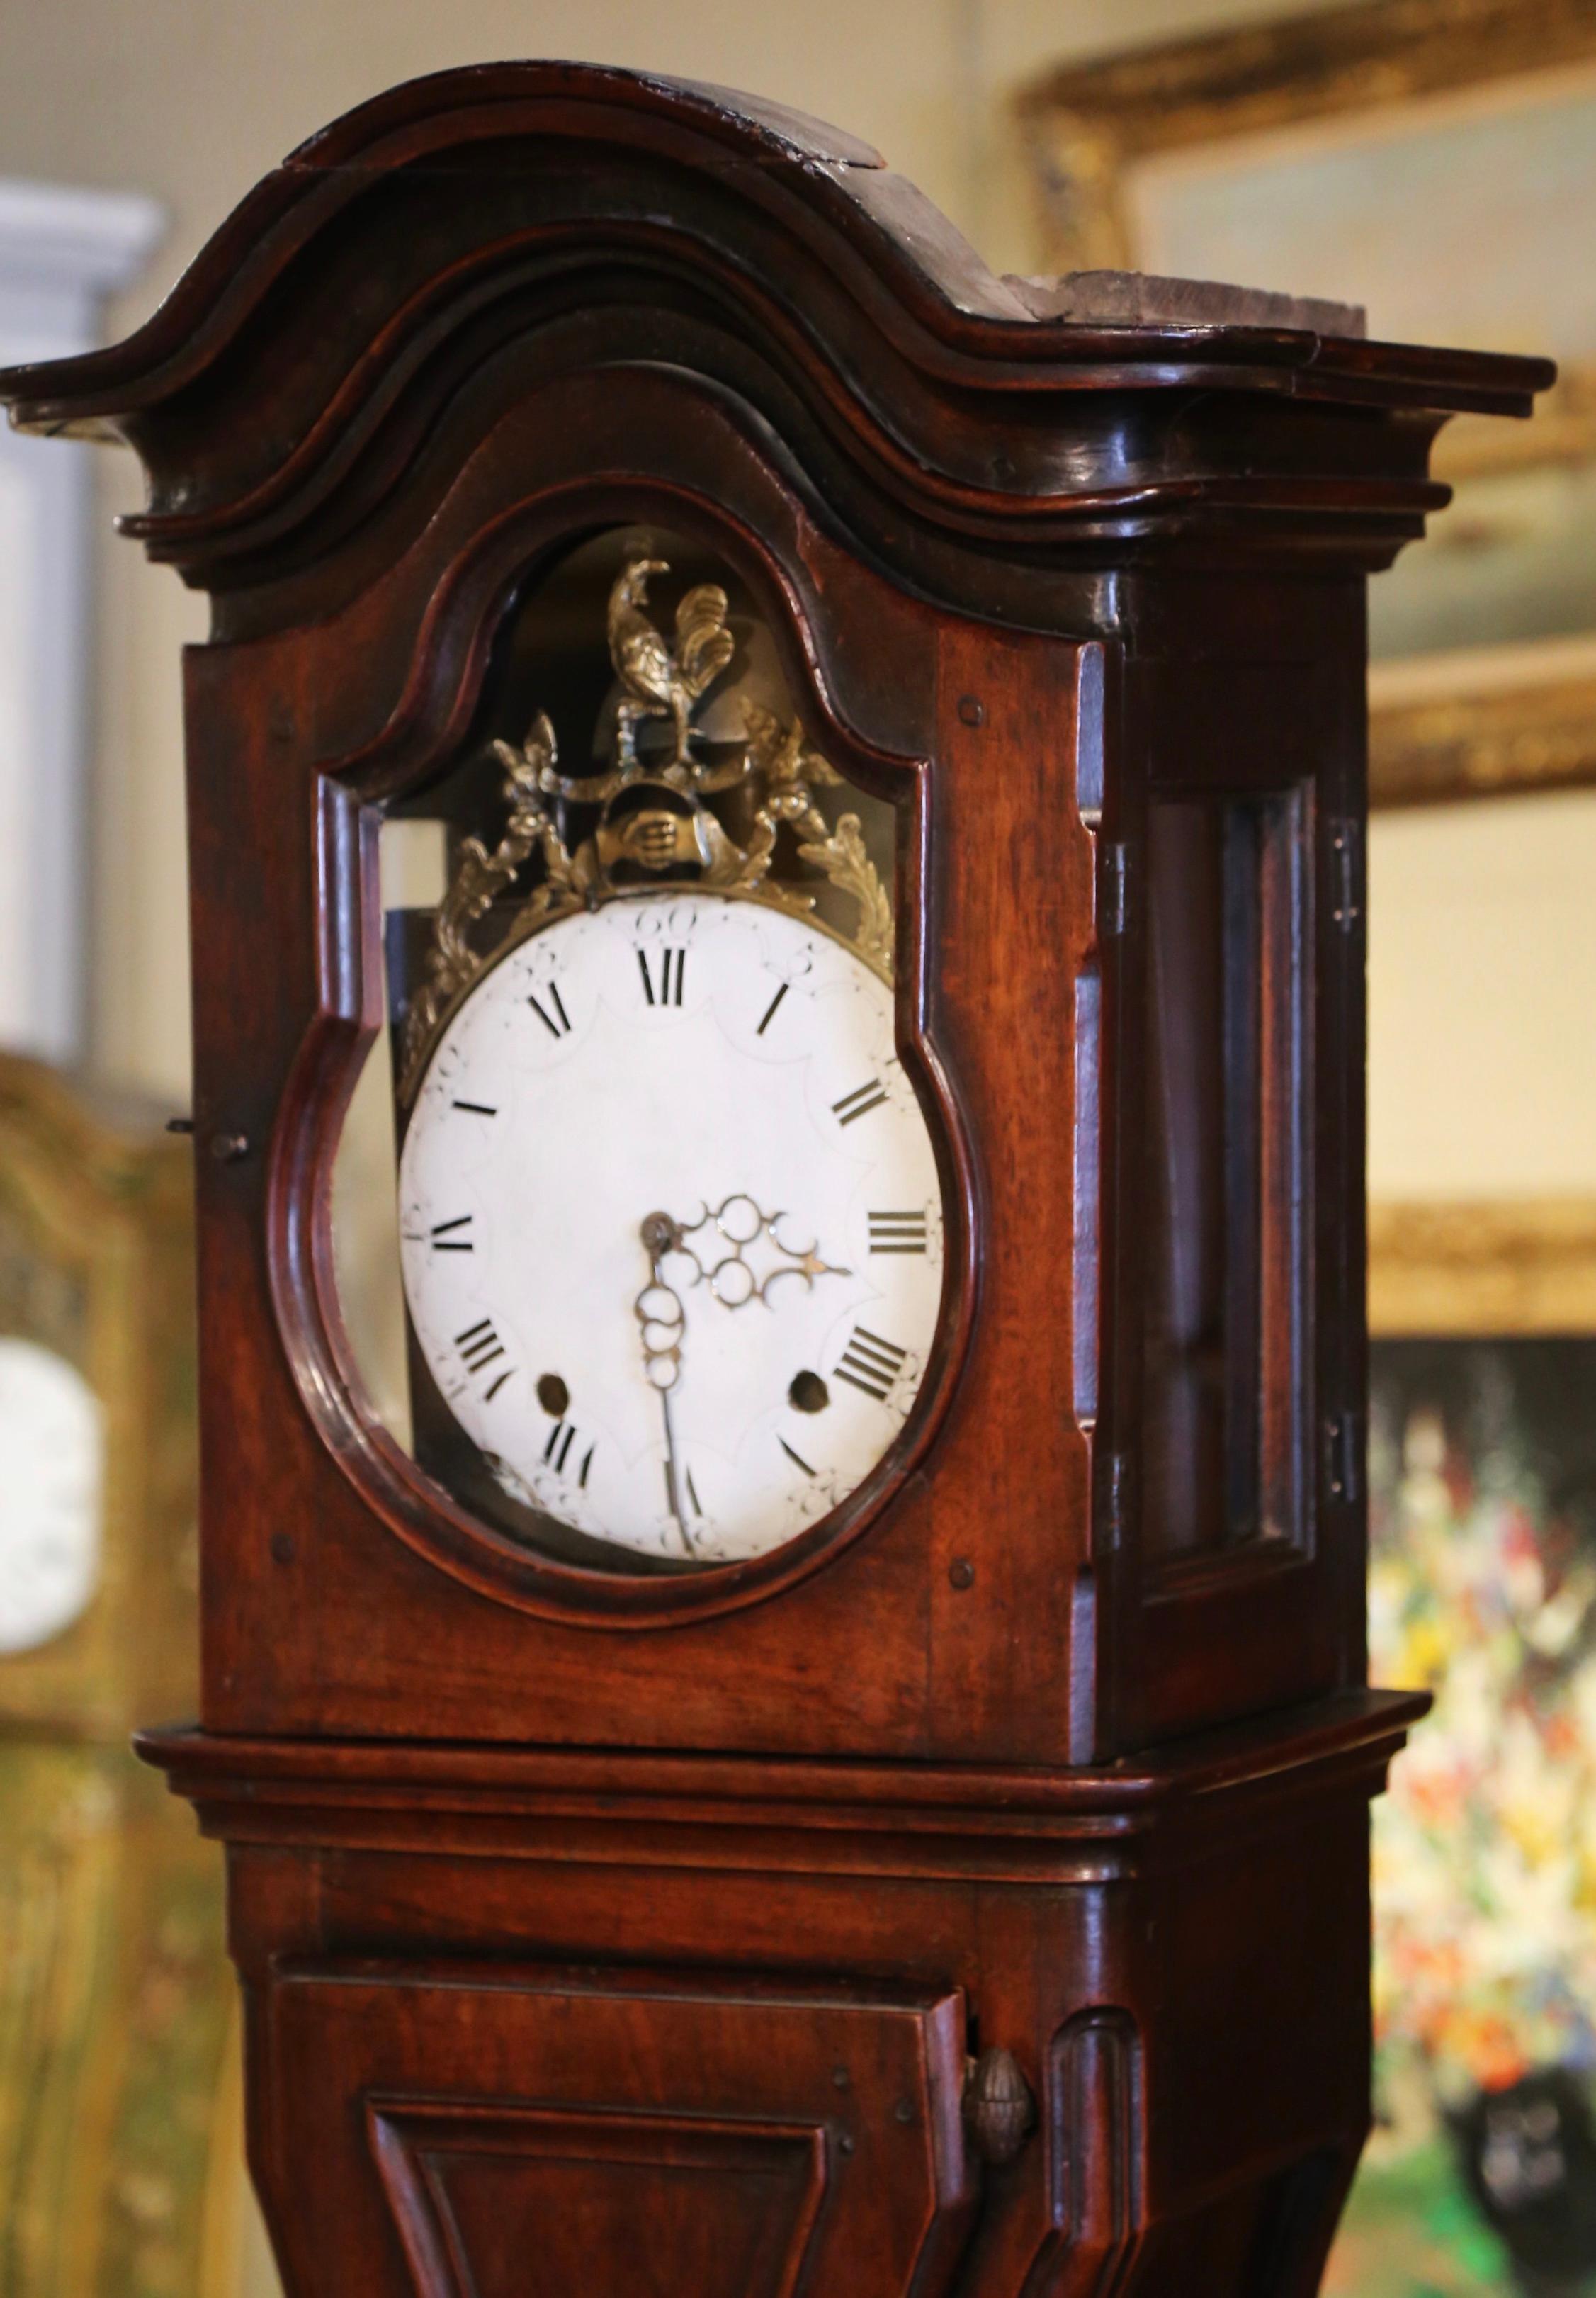 Patinated Mid-18th Century, French, Louis XV Carved Walnut Grandfather Clock with Rooster